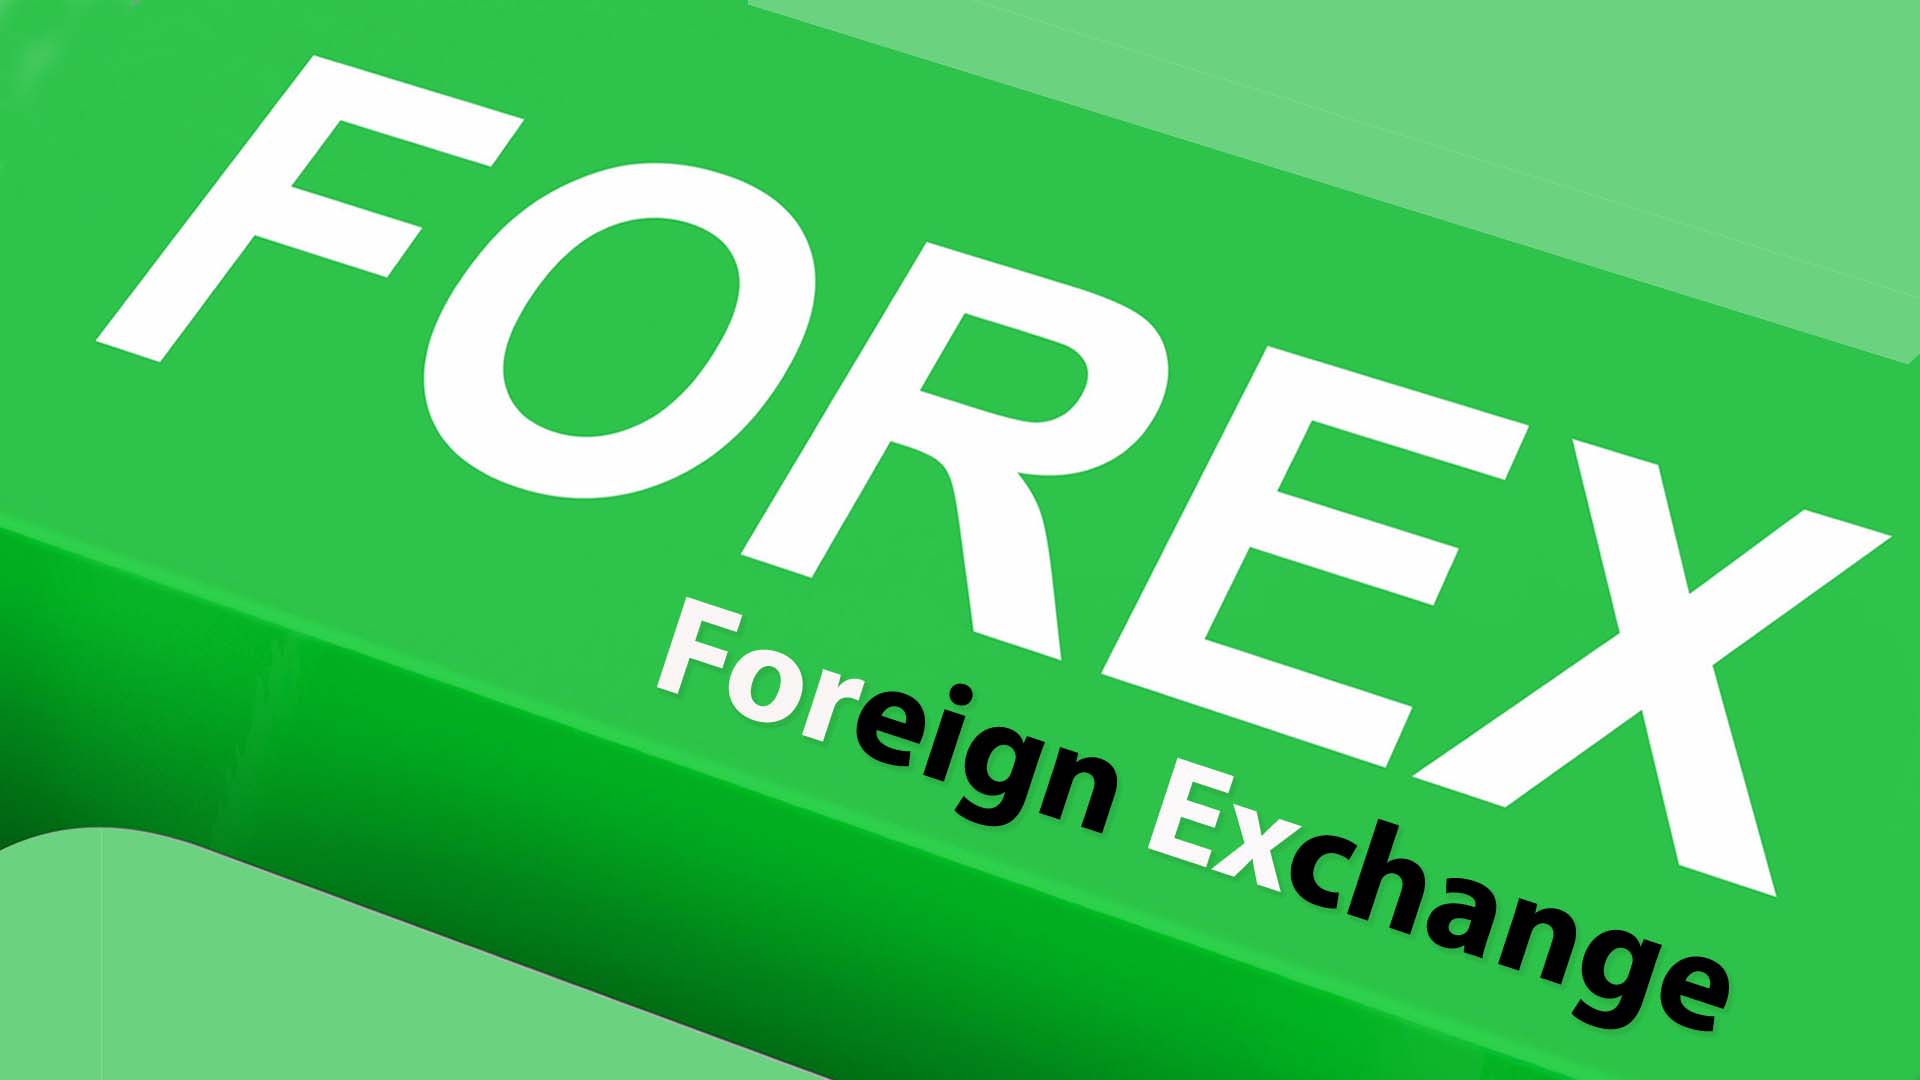 Forex content